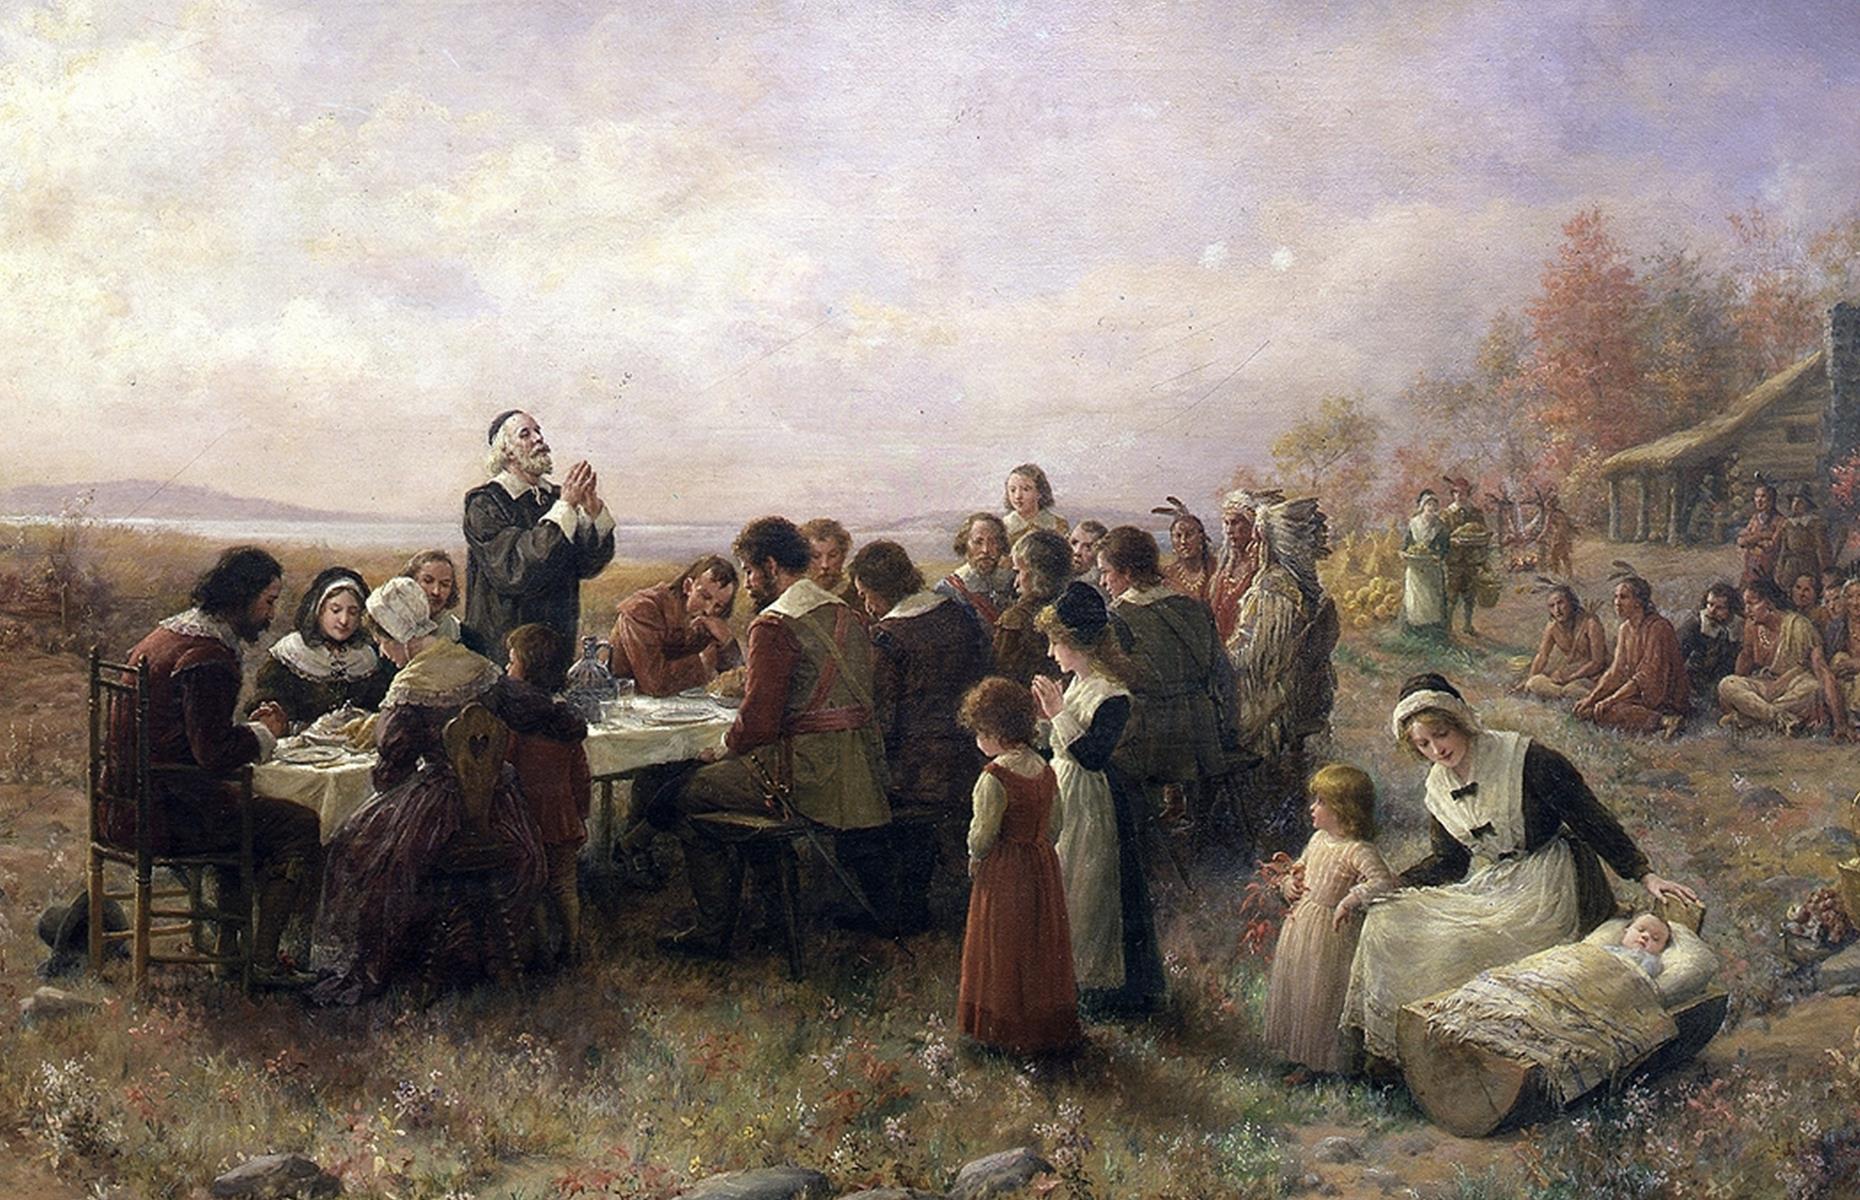 The Pilgrims’ home from home – the Mayflower – finally left North American shores in April of 1621. And thanks to help from the Native Peoples, the Pilgrims celebrated a bountiful harvest that year and had a huge feast that’s widely considered to be the very first Thanksgiving. The colonists and the Native Peoples are said to have sat down and broken bread together during this symbolic meal.